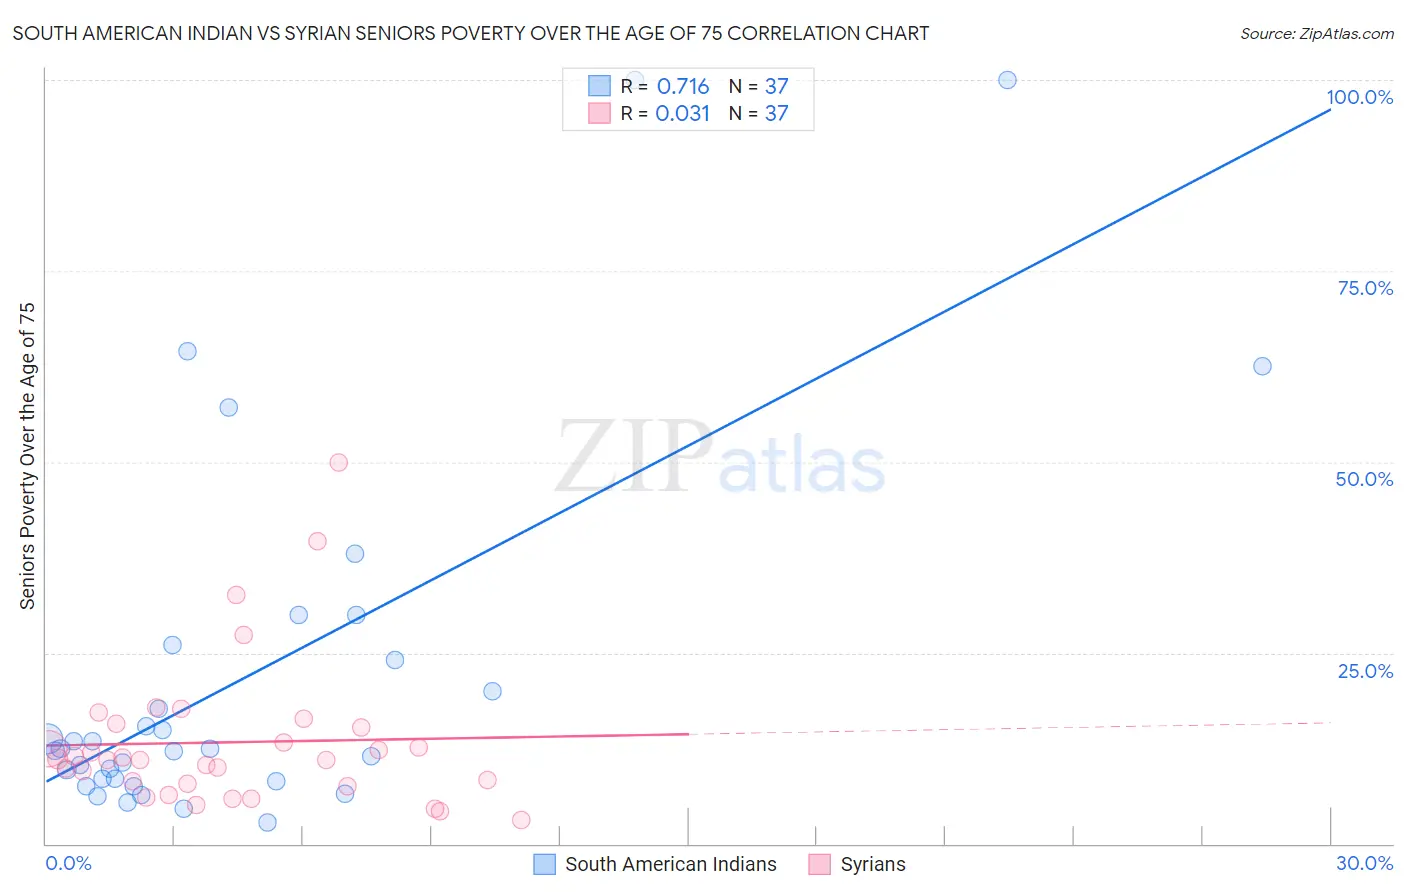 South American Indian vs Syrian Seniors Poverty Over the Age of 75